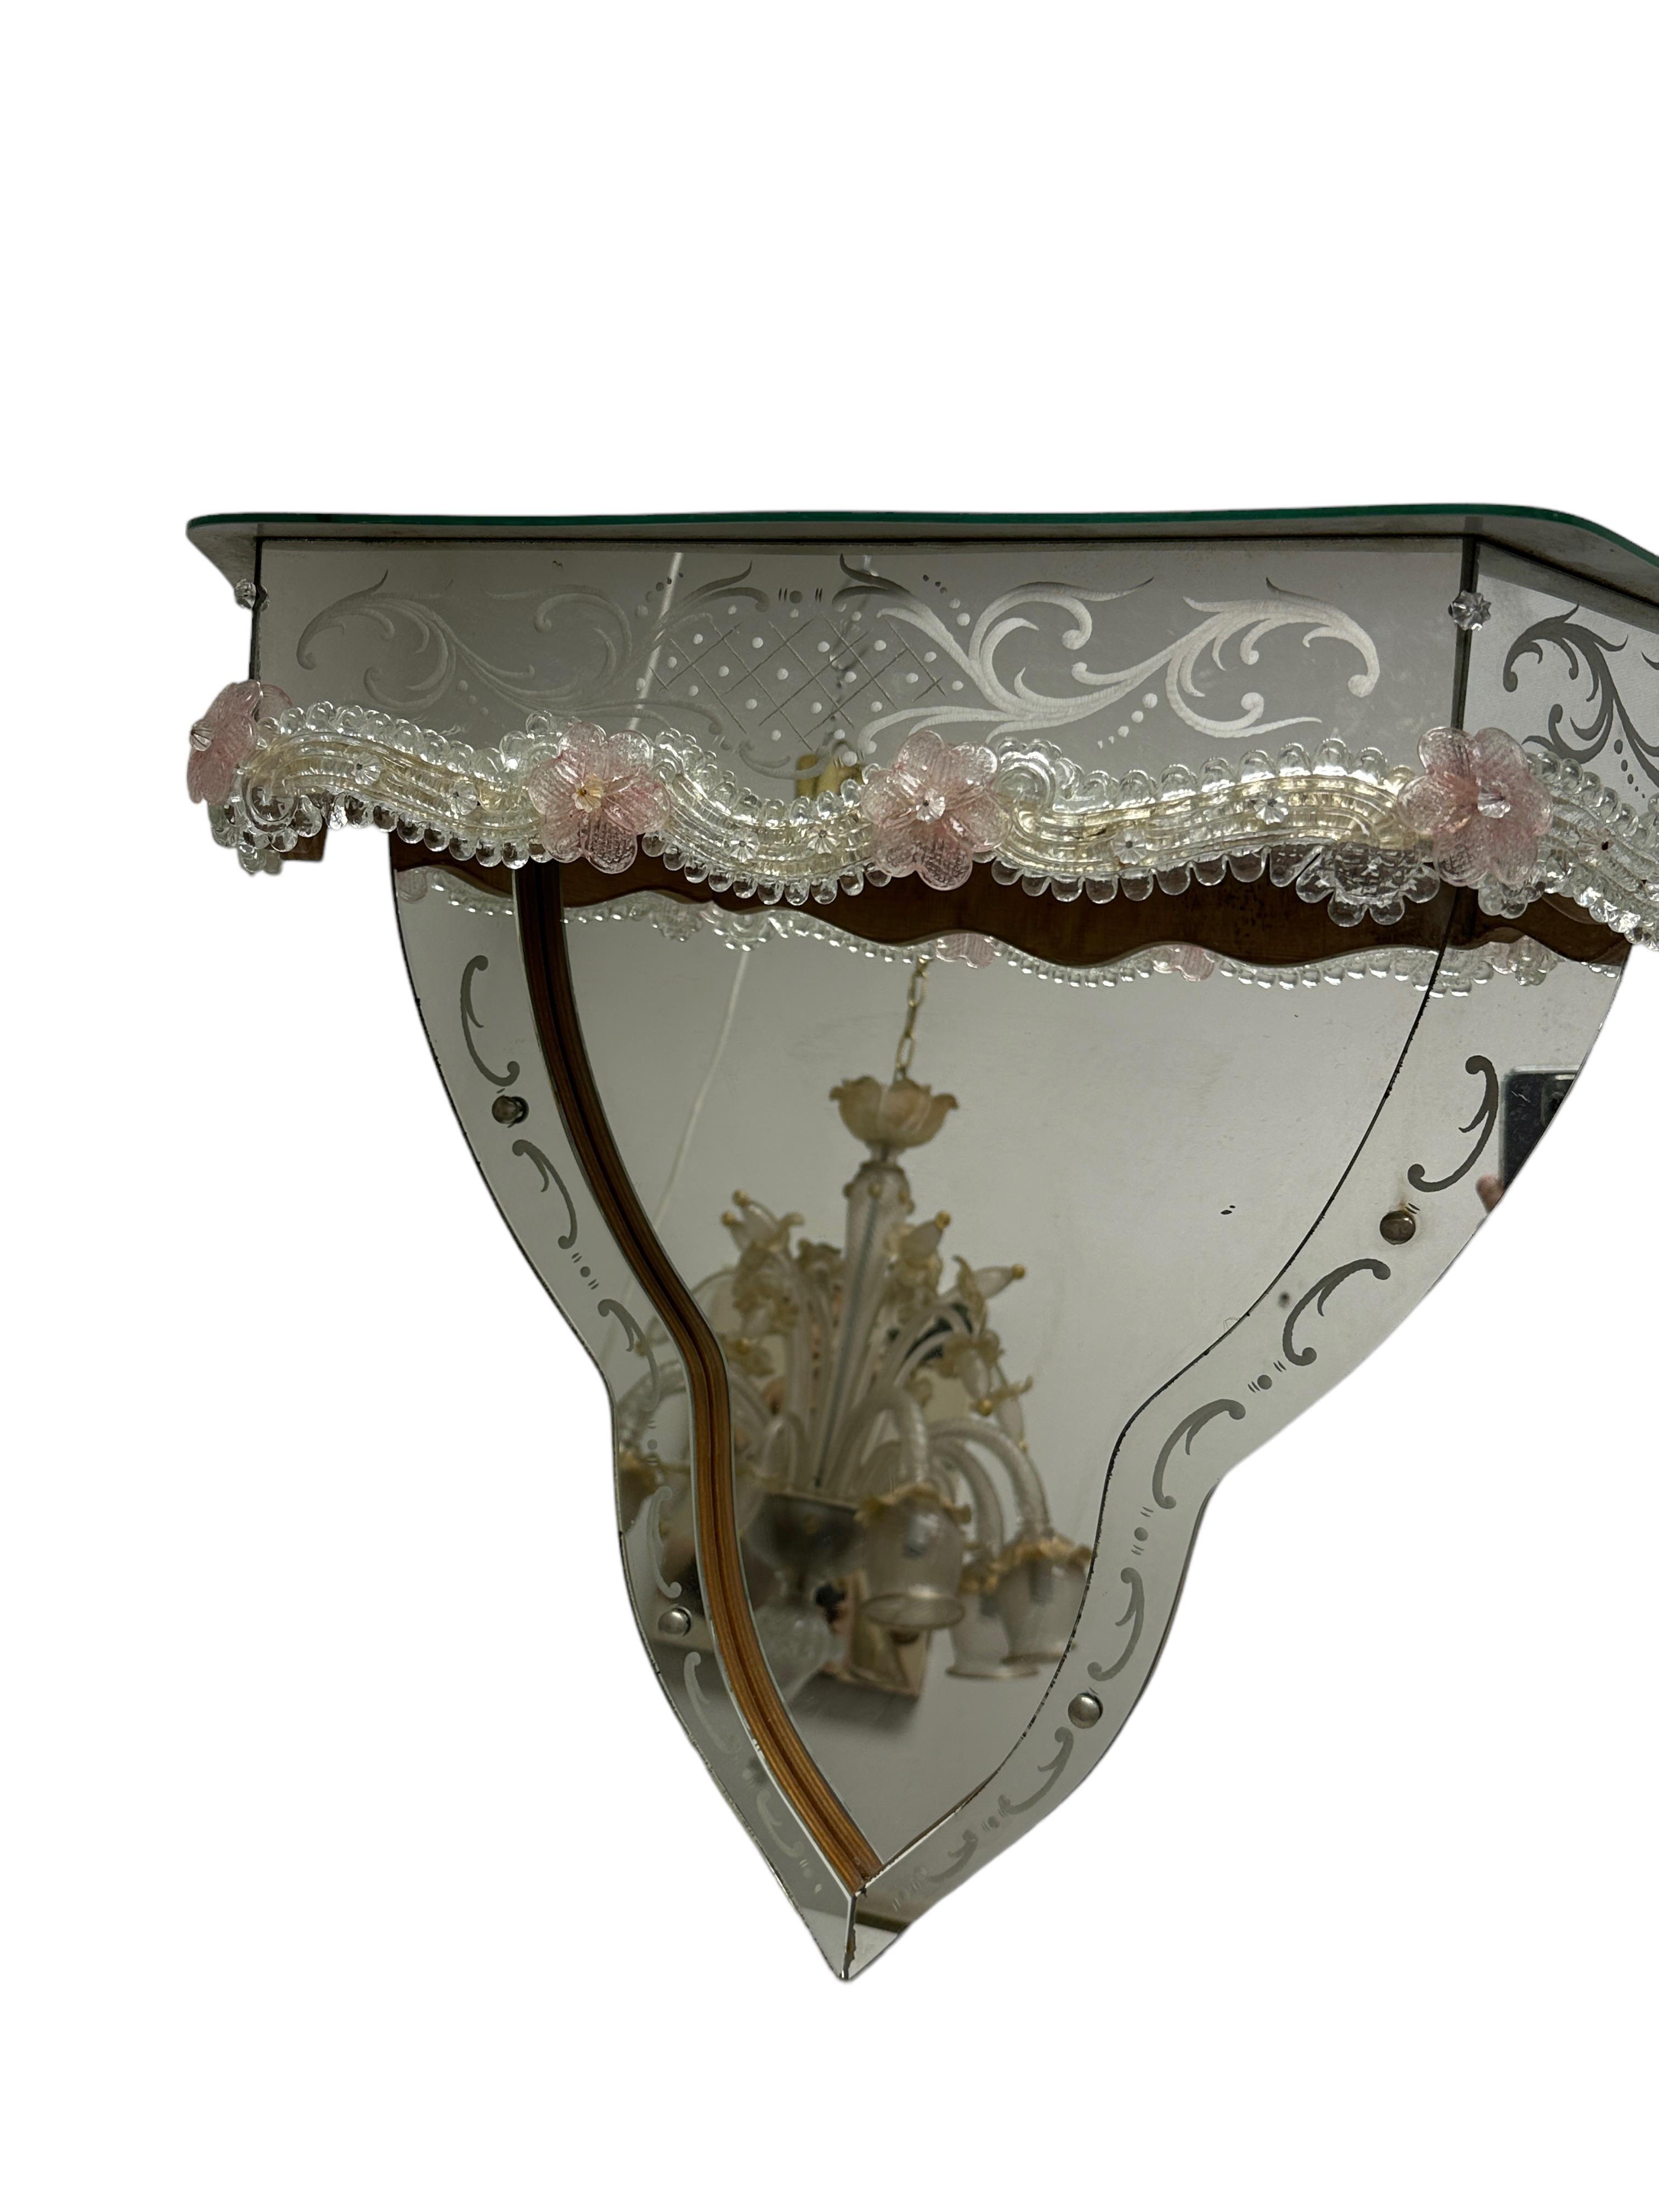 Hand-Crafted Stunning Murano Glass Mirrored Wall Console Pink Flowers, 1950s Italy